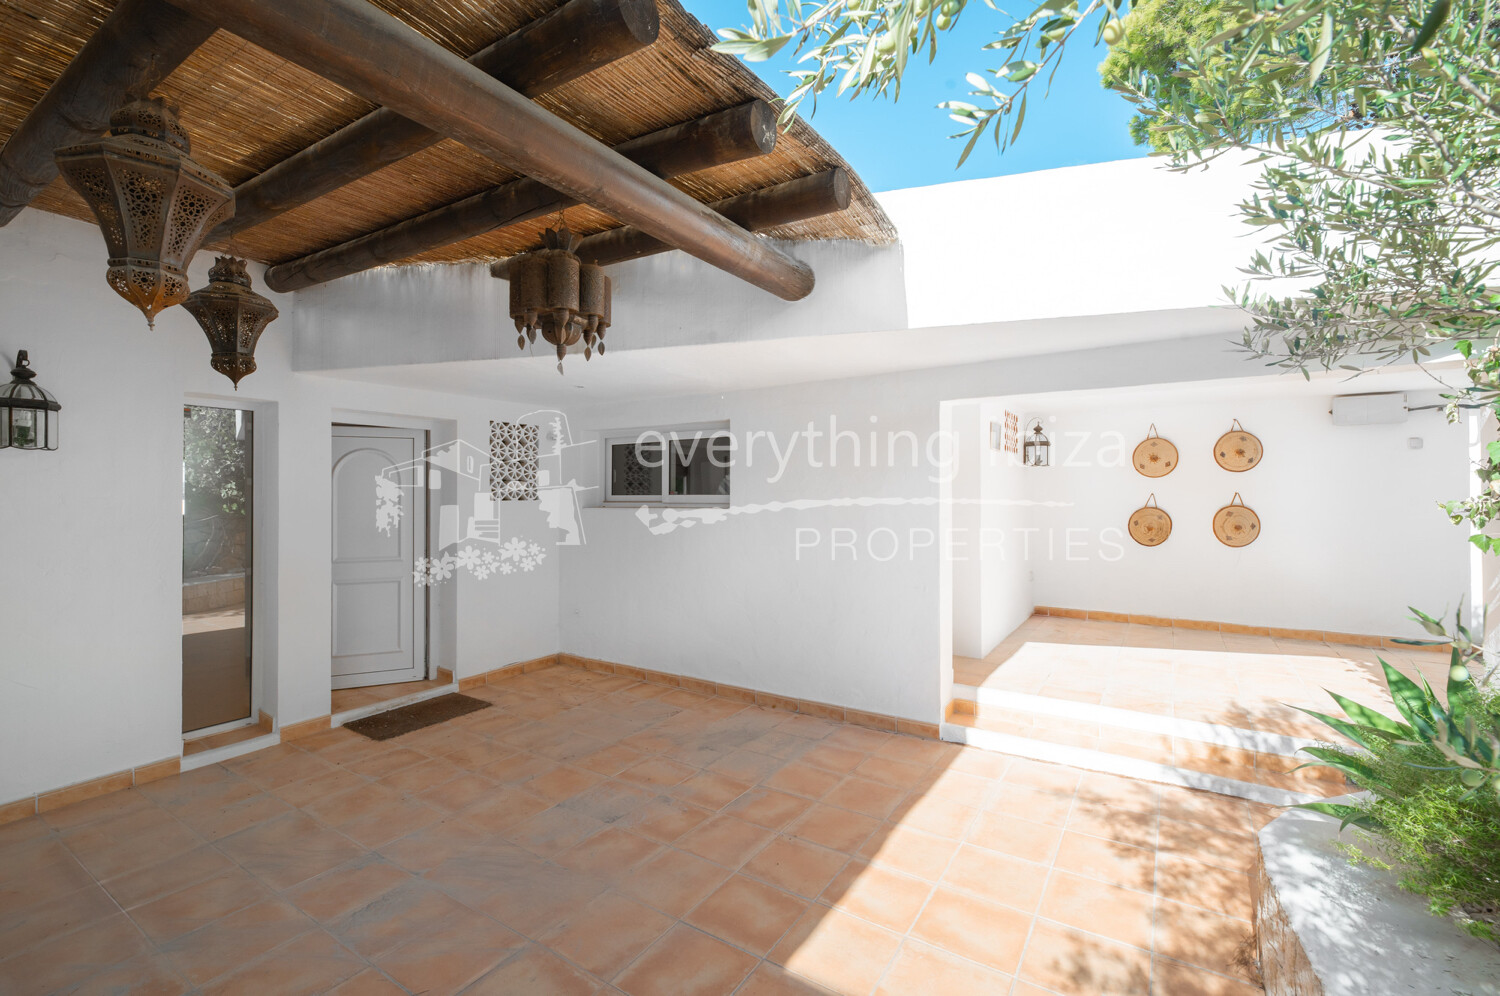 Frontline Detached Villa with Character and Direct Access to the Beach, ref. 1713, for sale in Ibiza by everything ibiza Properties